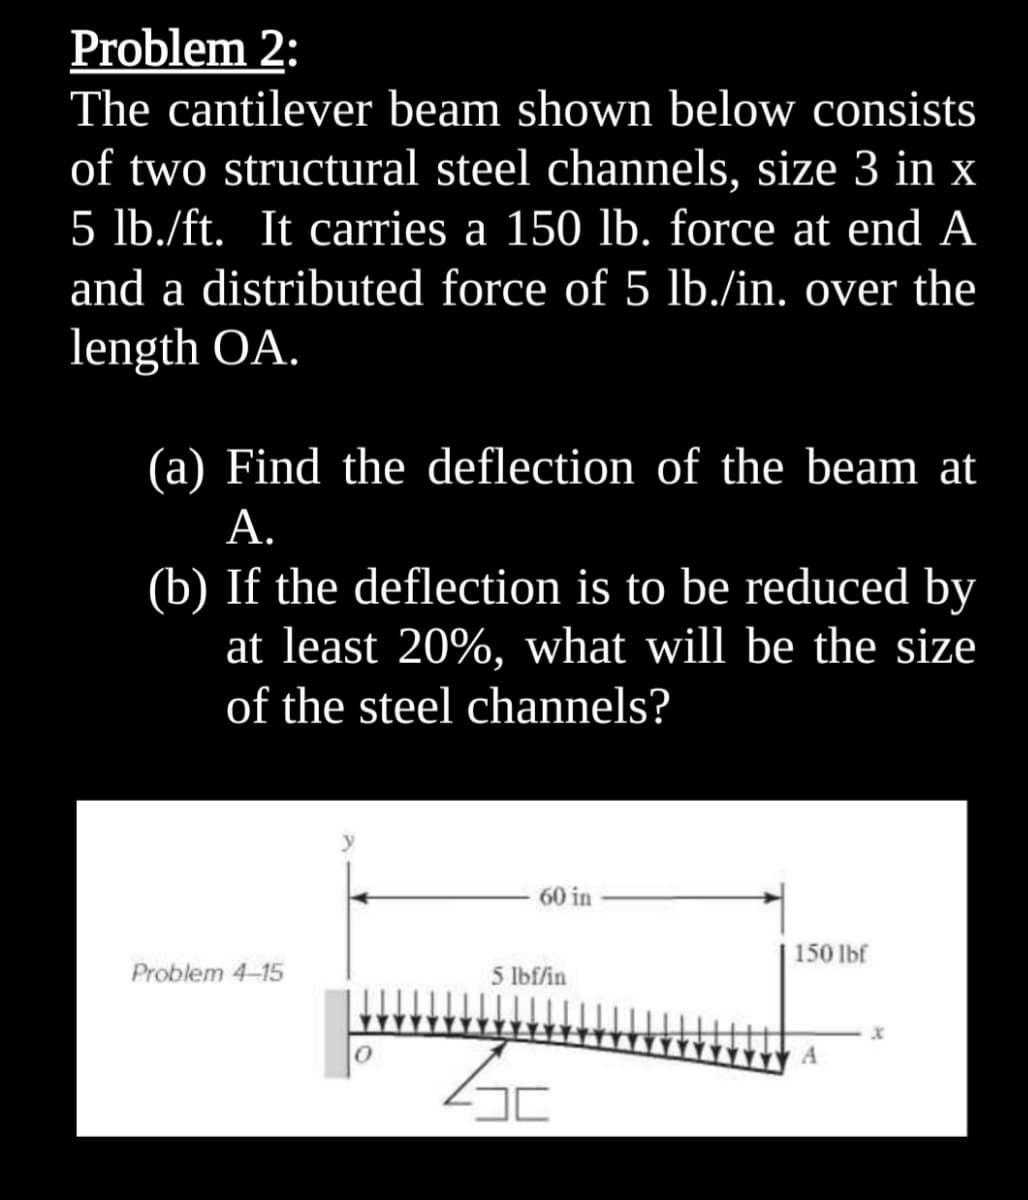 Problem 2:
The cantilever beam shown below consists
of two structural steel channels, size 3 in x
5 lb./ft. It carries a 150 lb. force at end A
and a distributed force of 5 lb./in. over the
length OA.
(a) Find the deflection of the beam at
А.
(b) If the deflection is to be reduced by
at least 20%, what will be the size
of the steel channels?
60 in
150 lbf
Problem 4-15
5 lbf/in
A
